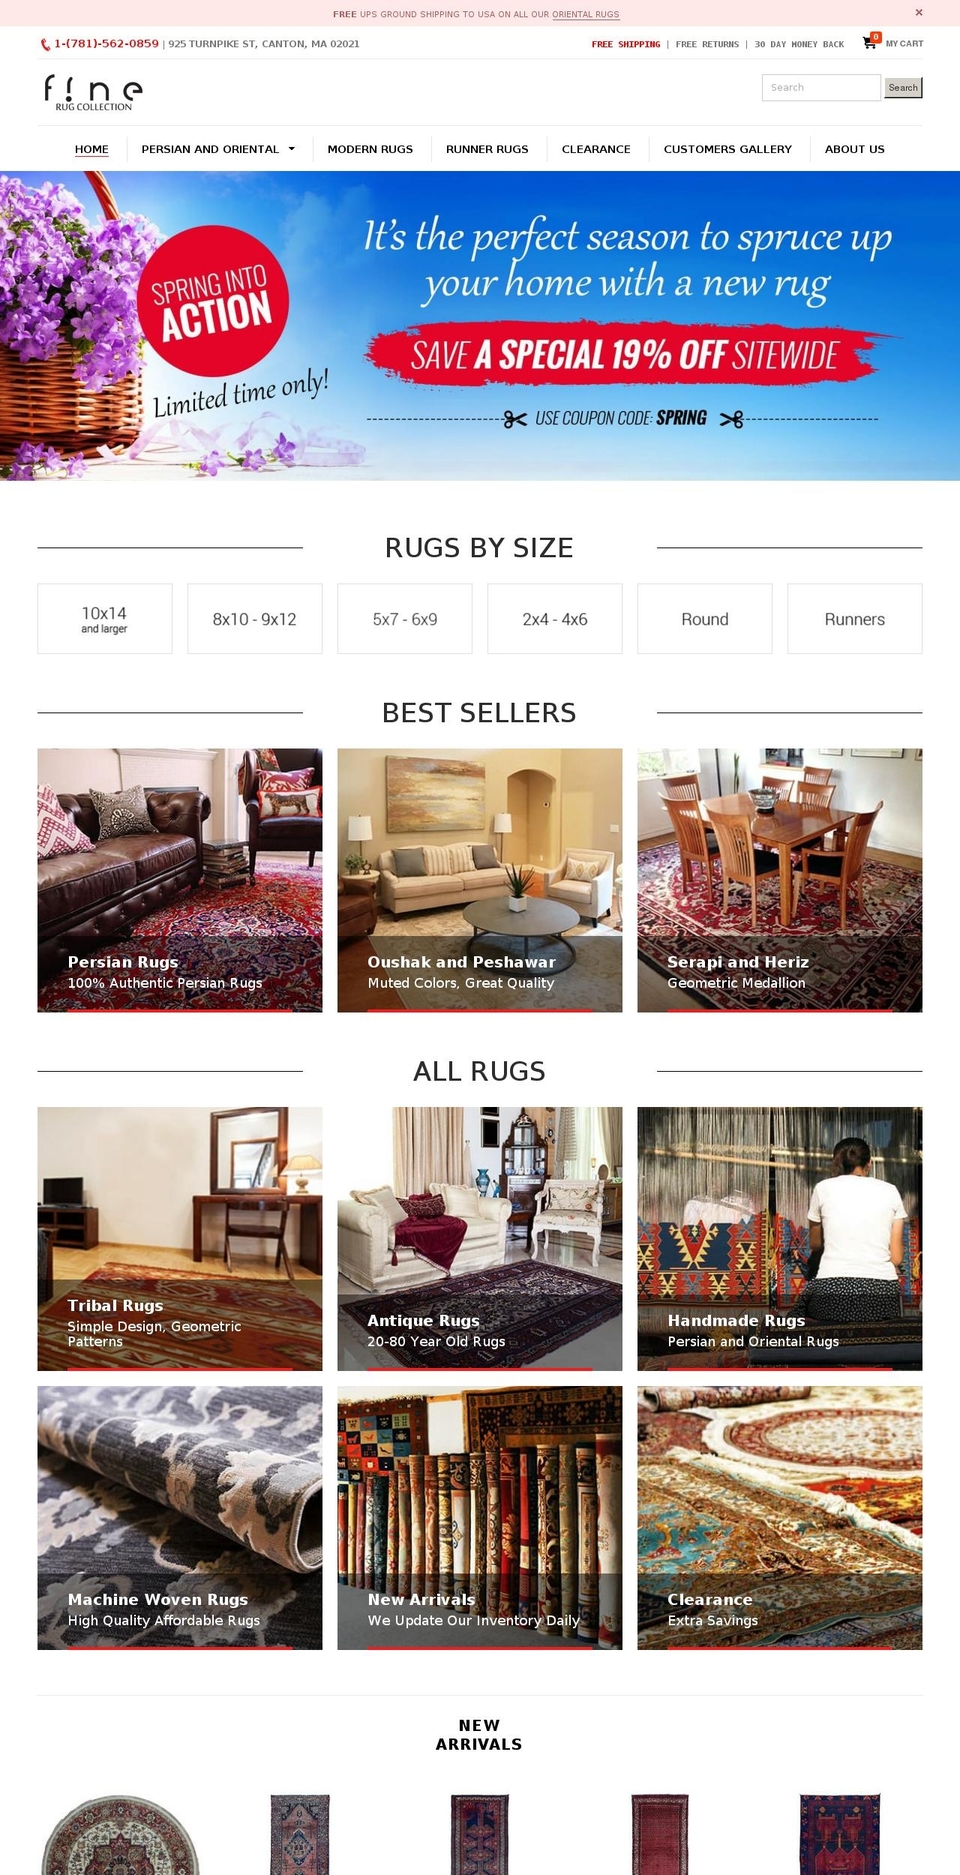 Live Shopify theme site example finerugcollection.com